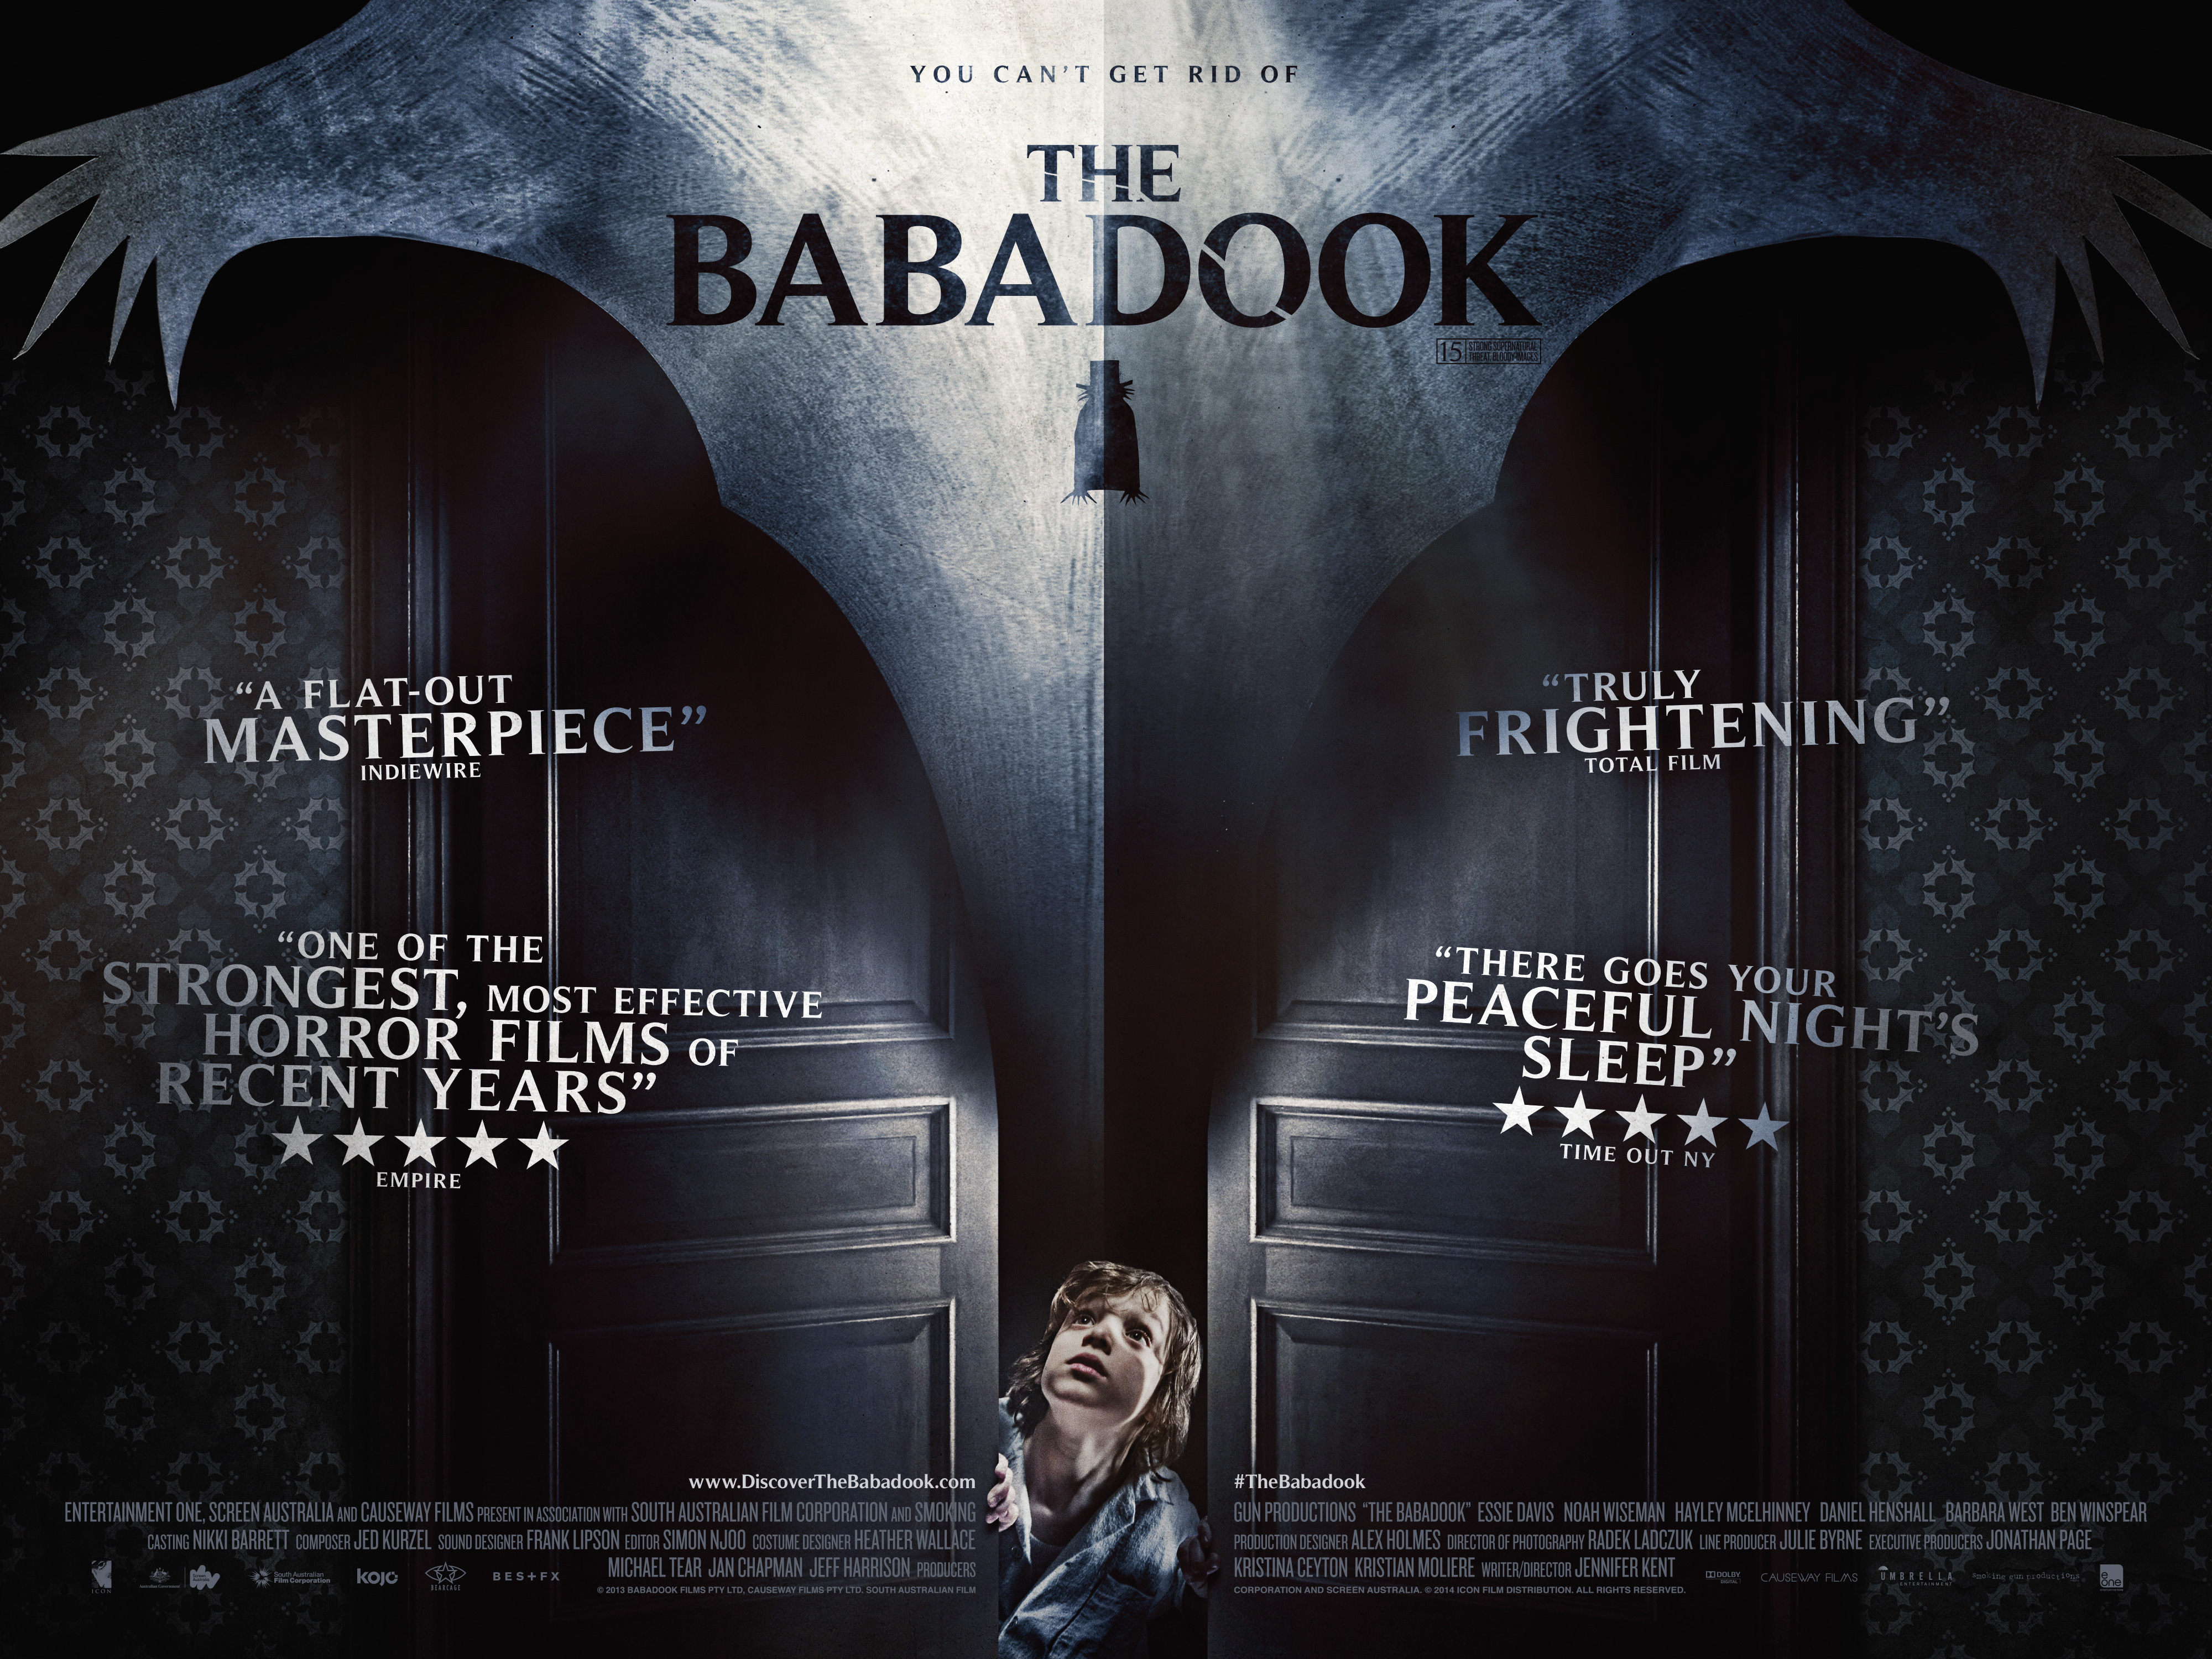 who played the babadook